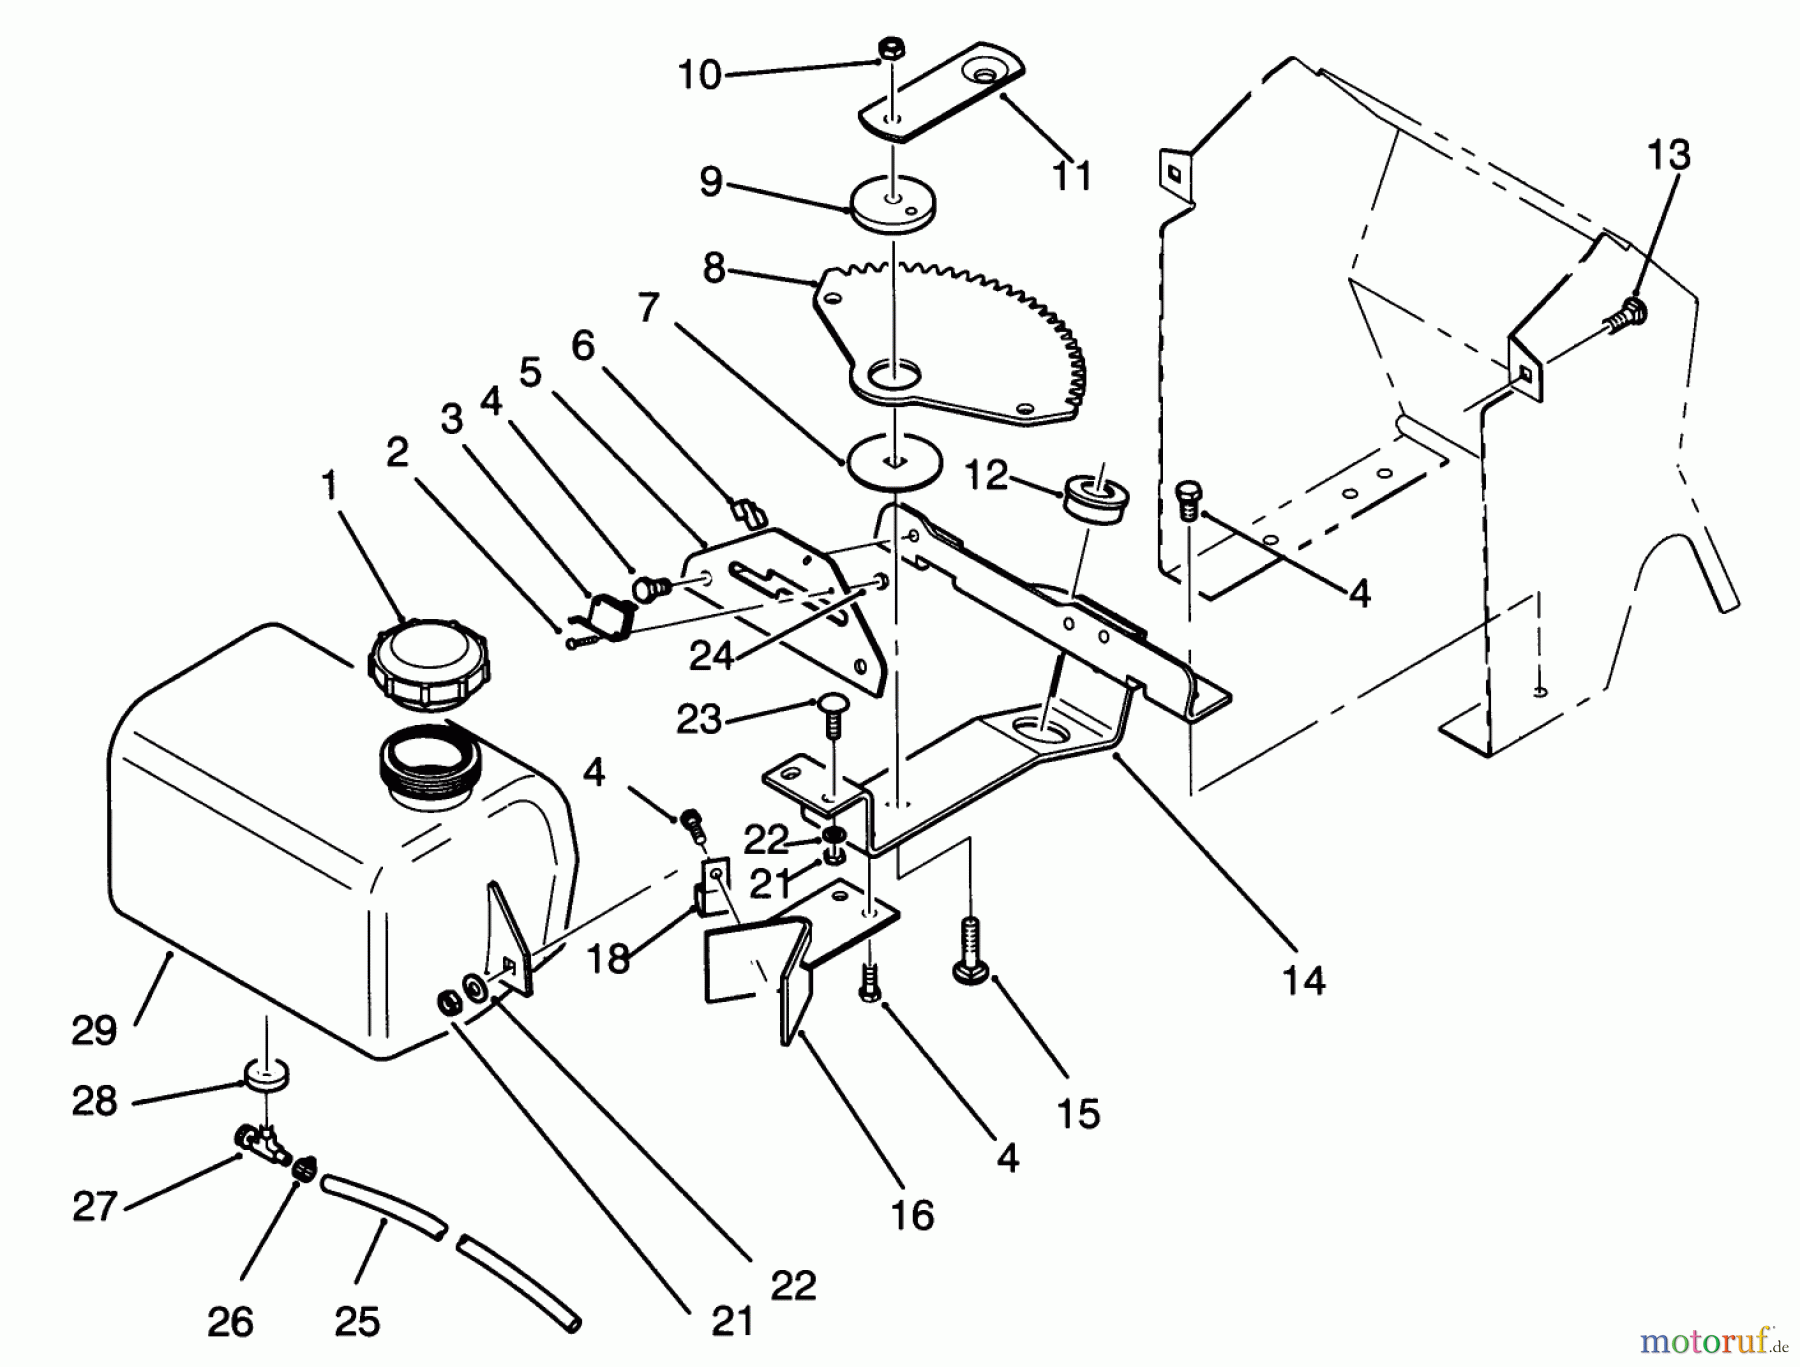  Toro Neu Mowers, Lawn & Garden Tractor Seite 1 72041 (244-H) - Toro 244-H Yard Tractor, 1993 (3900001-3999999) FUEL TANK AND STEERING BRACKET ASSEMBLY